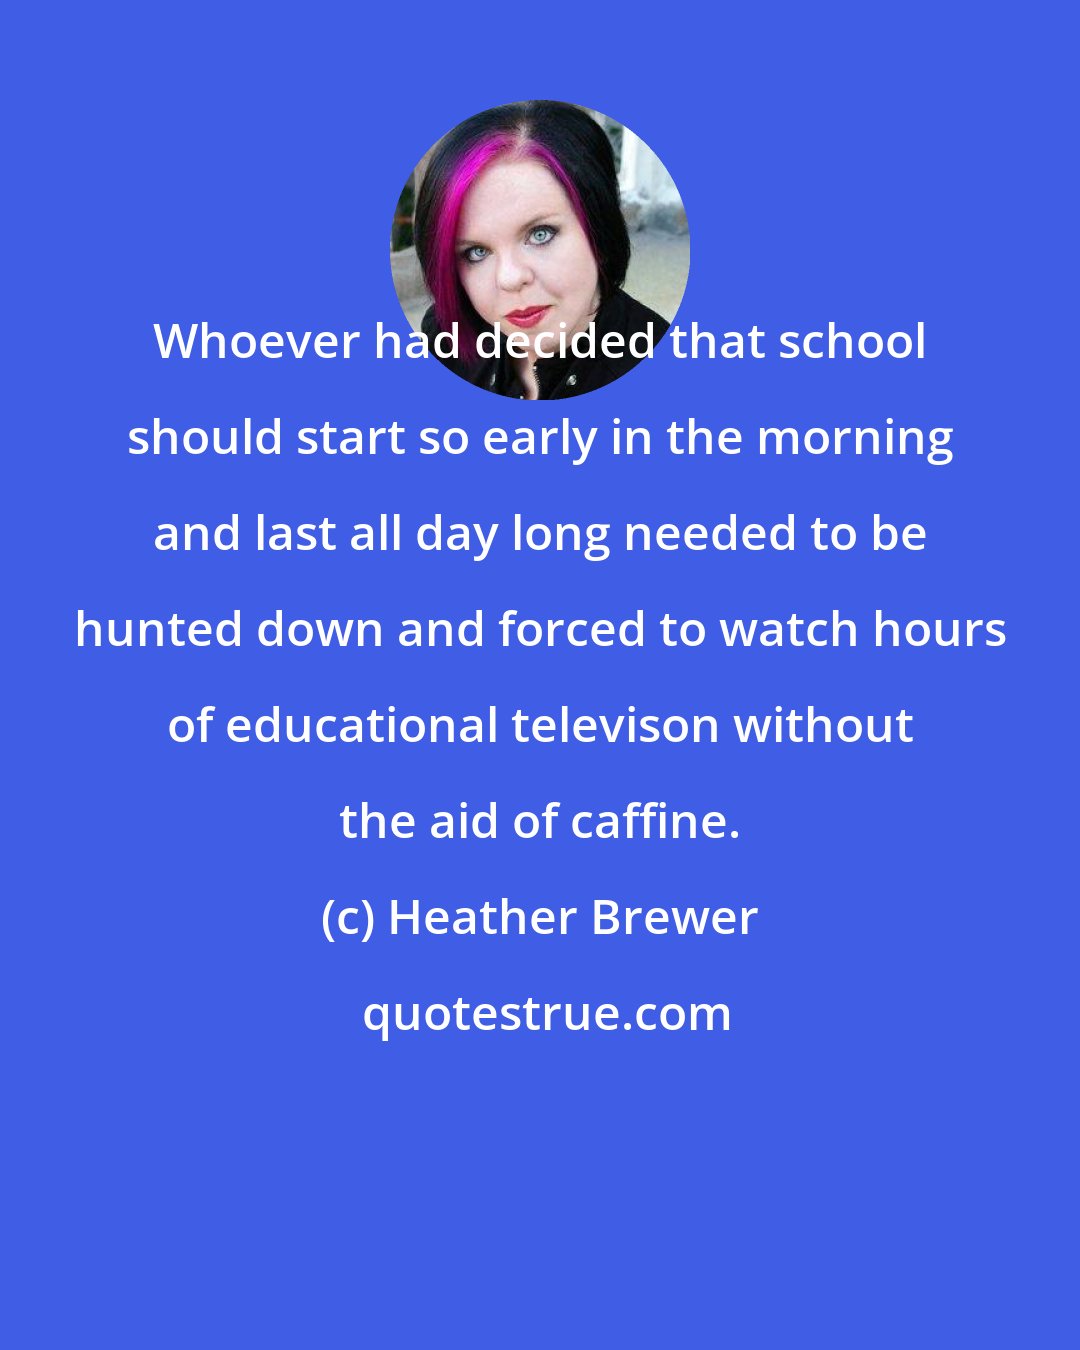 Heather Brewer: Whoever had decided that school should start so early in the morning and last all day long needed to be hunted down and forced to watch hours of educational televison without the aid of caffine.